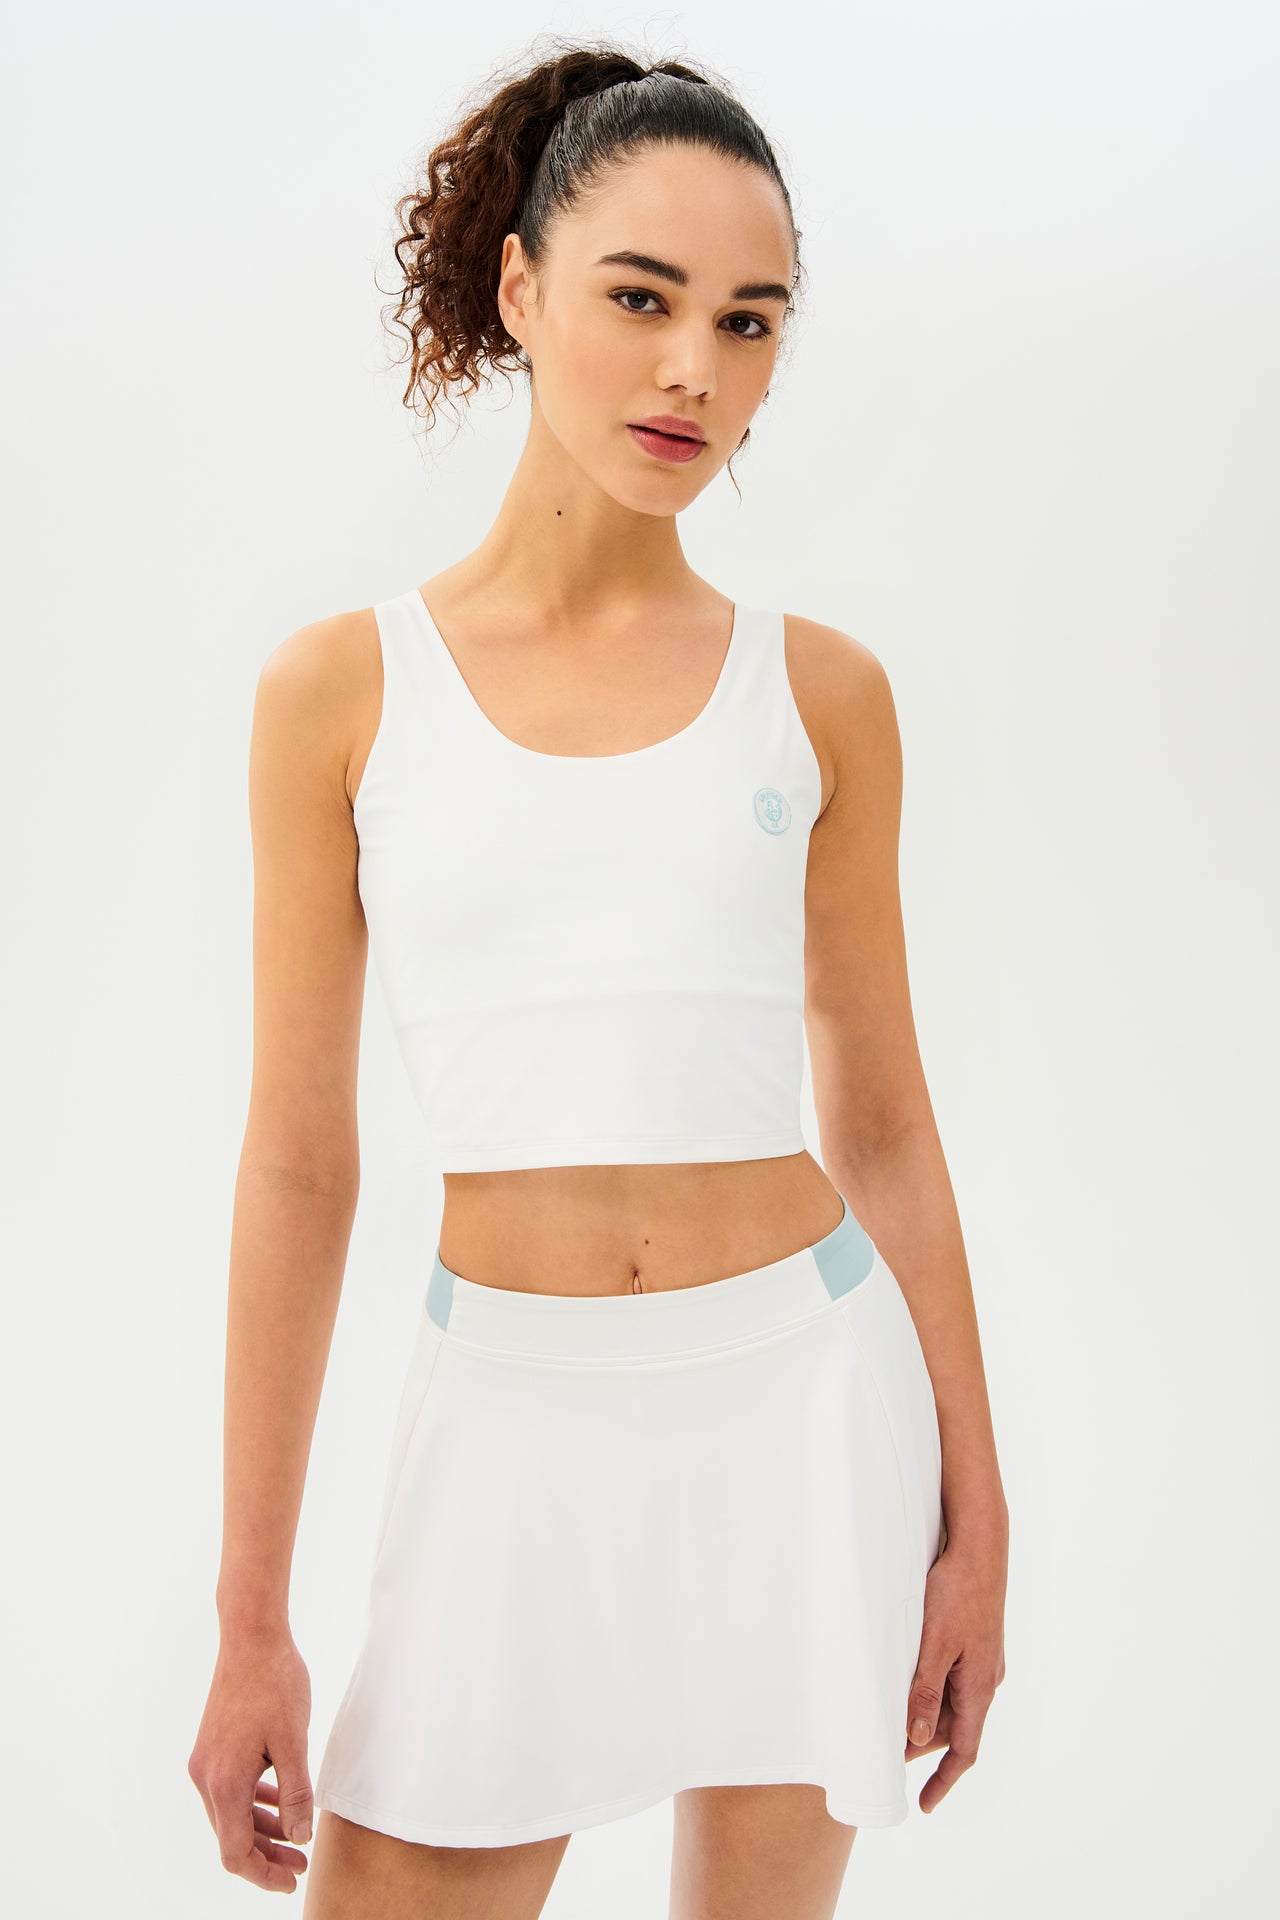 Front side view of woman with dark curly hair in a ponytail wearing a cropped white tank bra with white skort with teal details on the waistband and logo